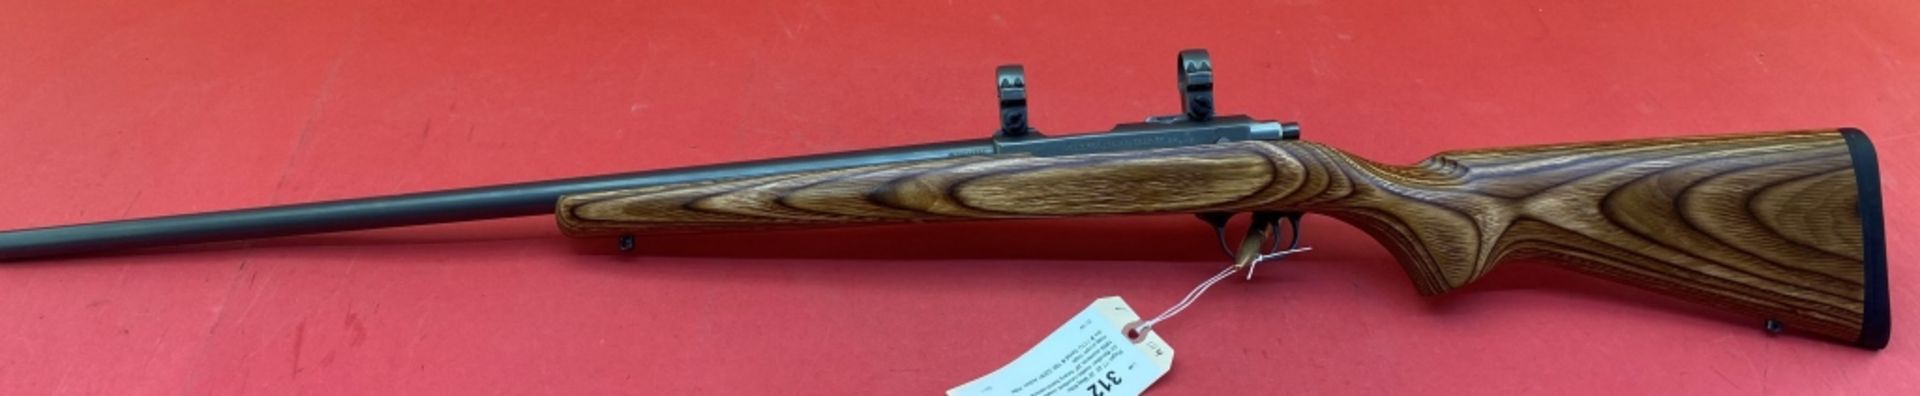 Ruger 77-22 .22 Mag Rifle - Image 9 of 9